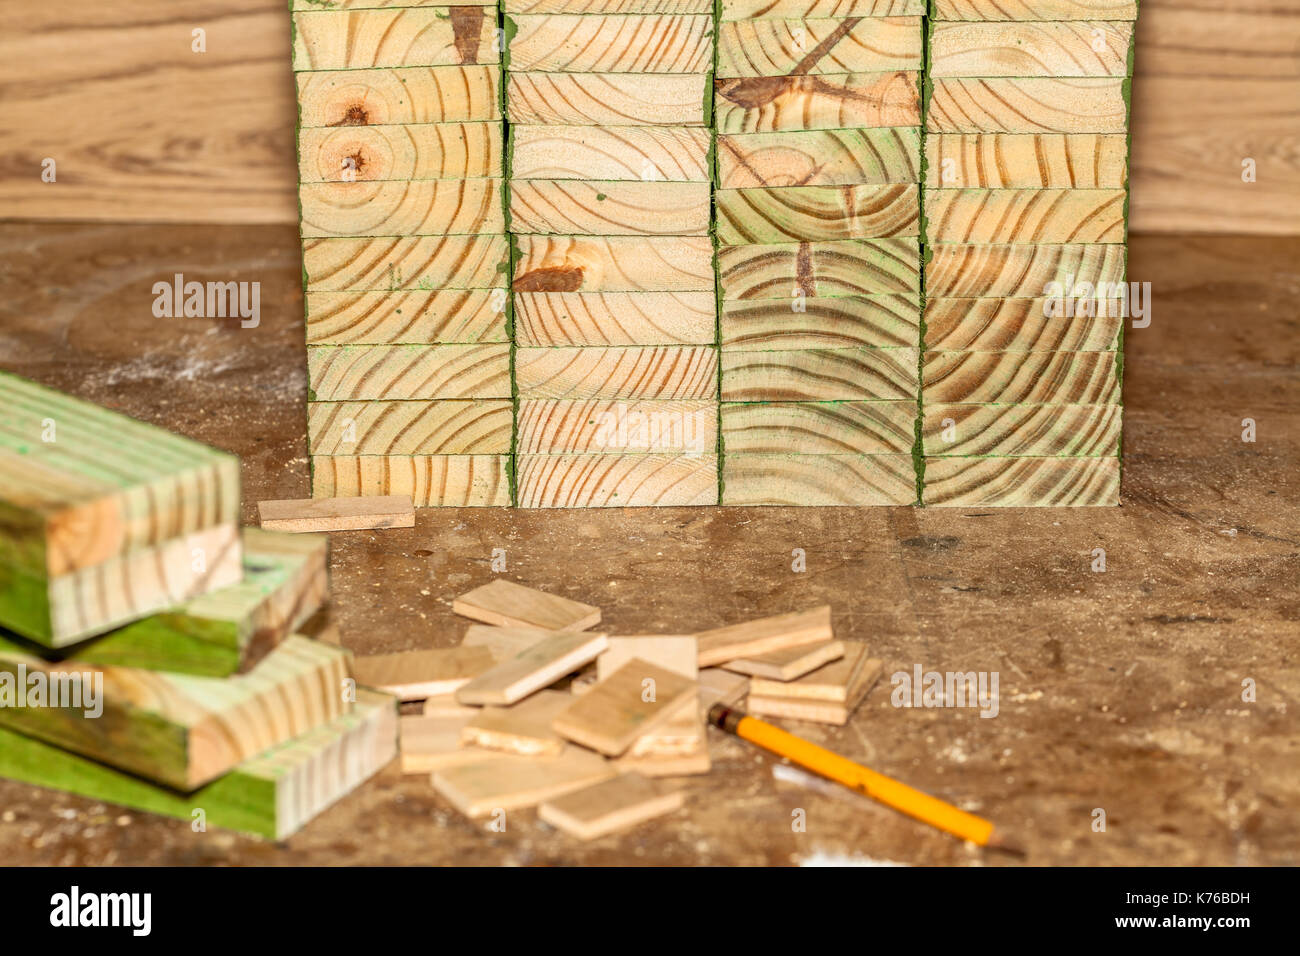 Impregnated wooden panels, tools , carpentry wood product Stock Photo